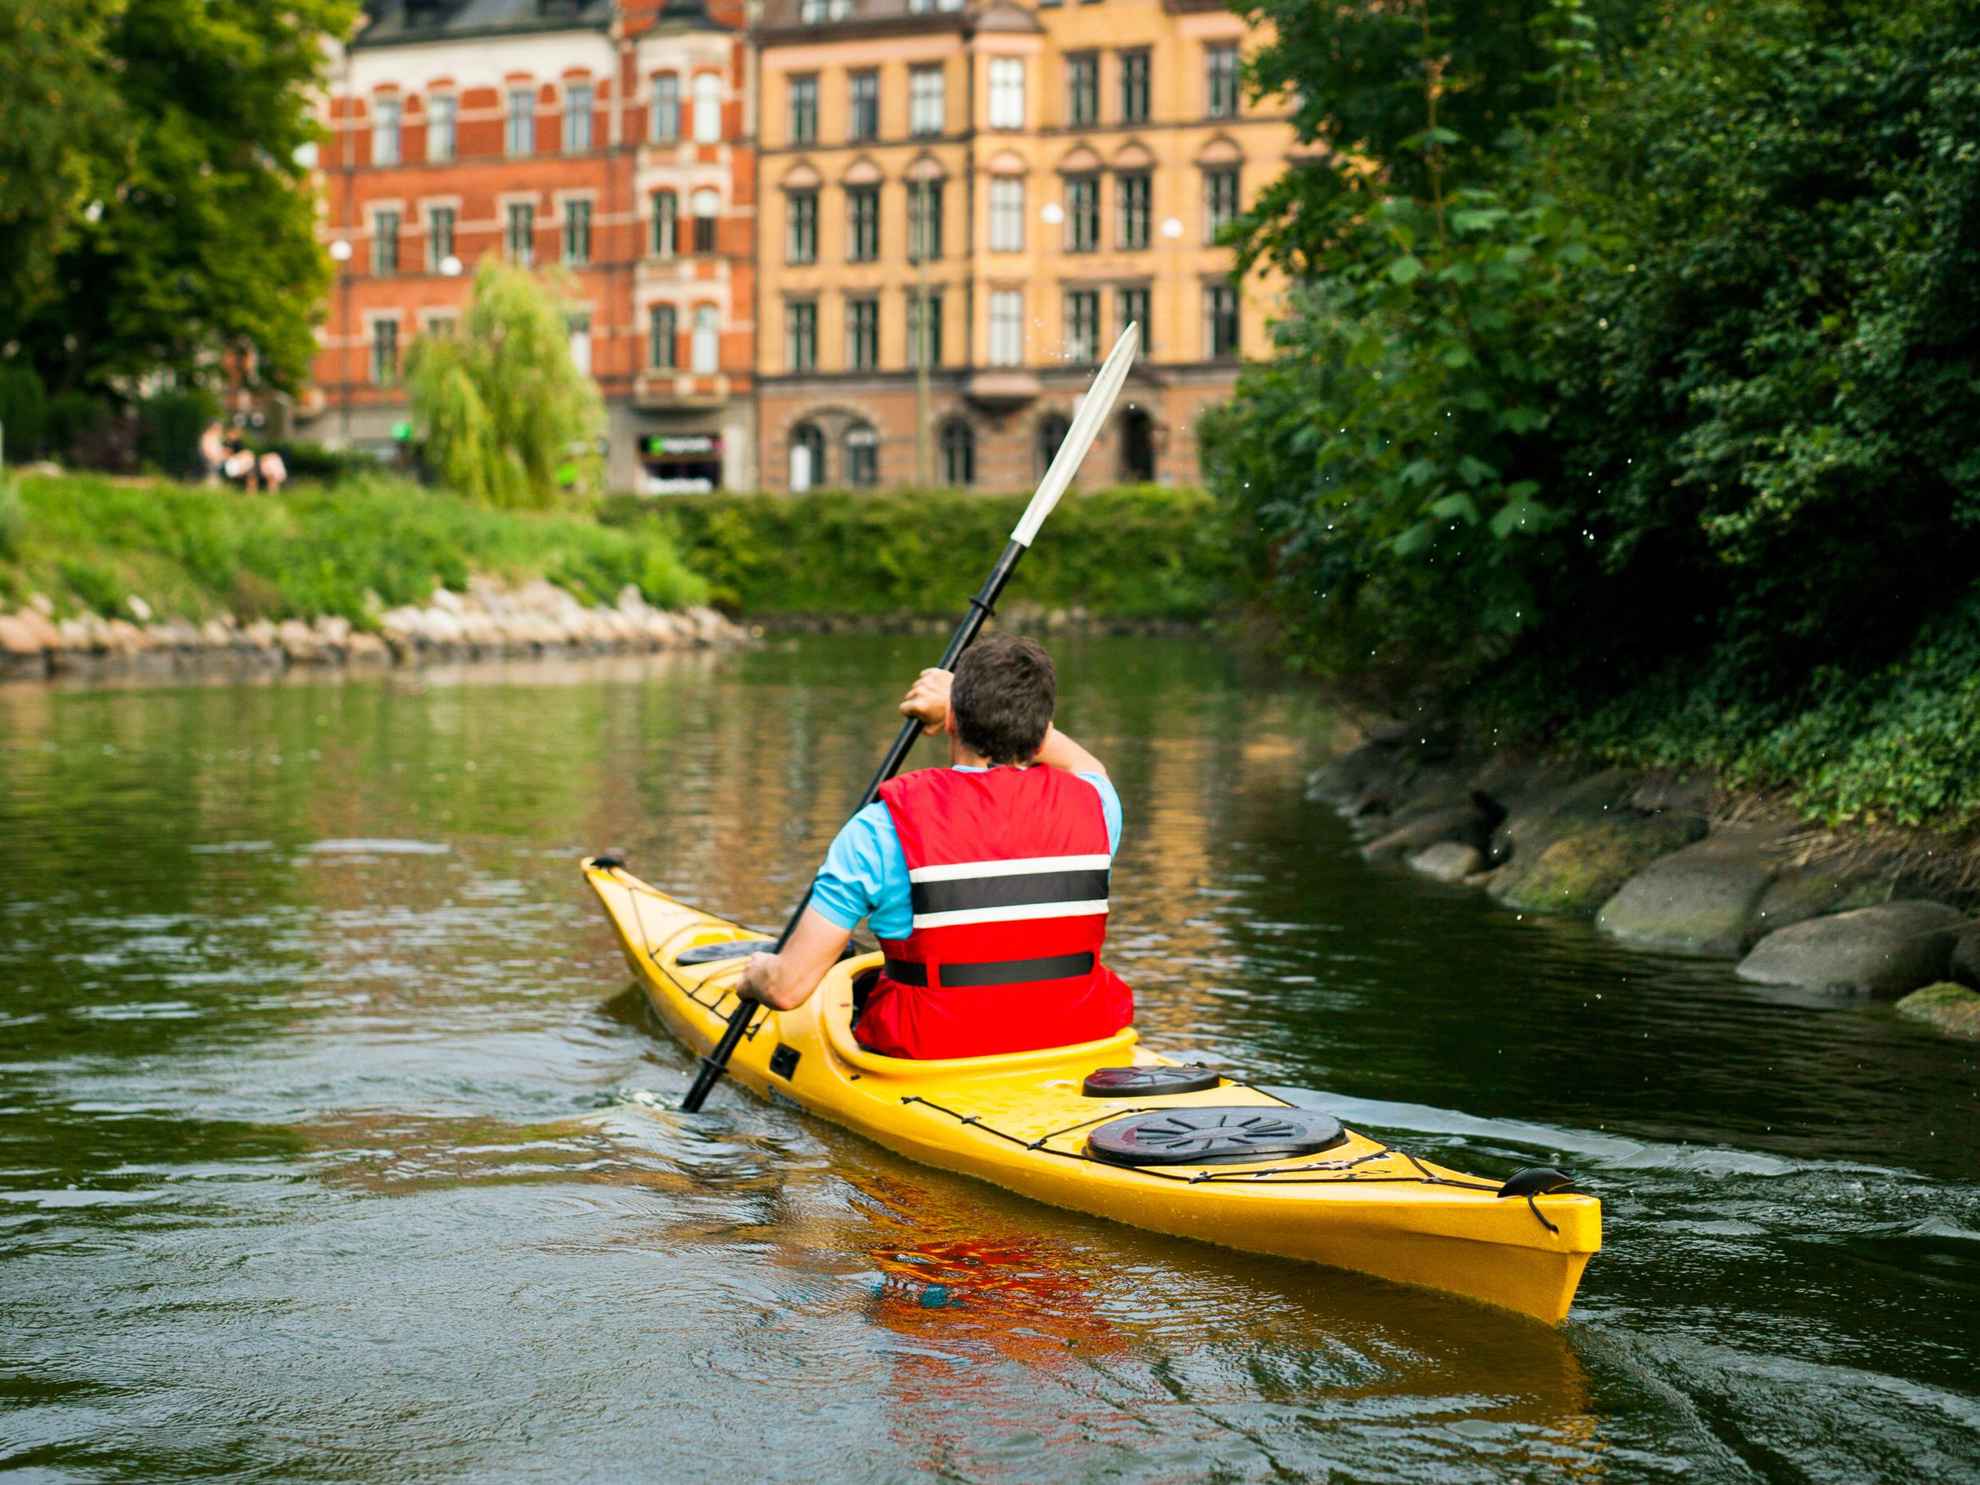 A man in a yellow kayak paddles in Malmö town. Houses in front of him and greenery along the sides of the canal.